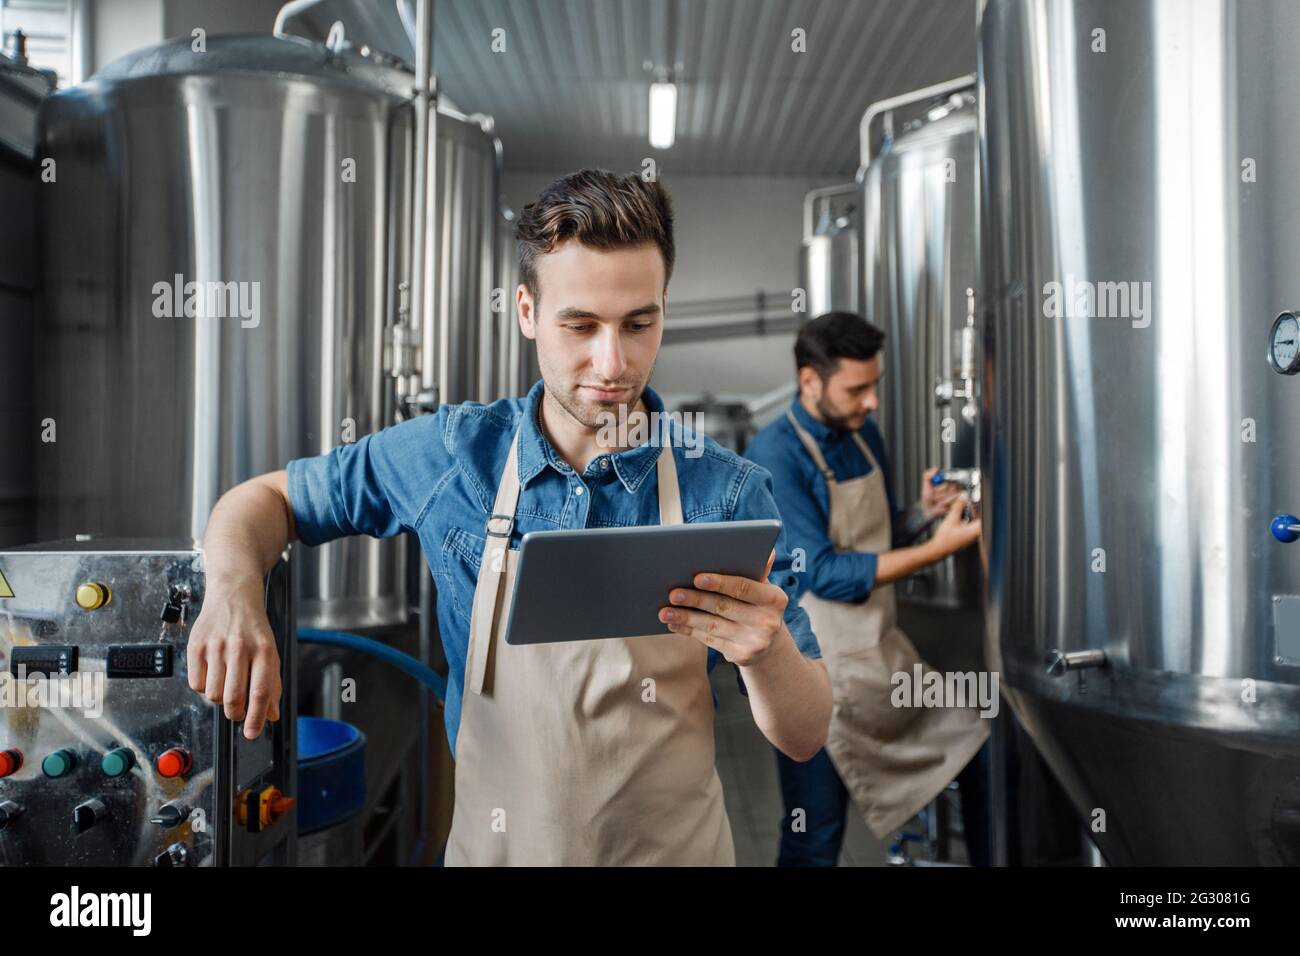 Smart factory, modern brewery management and craft beverage production Stock Photo